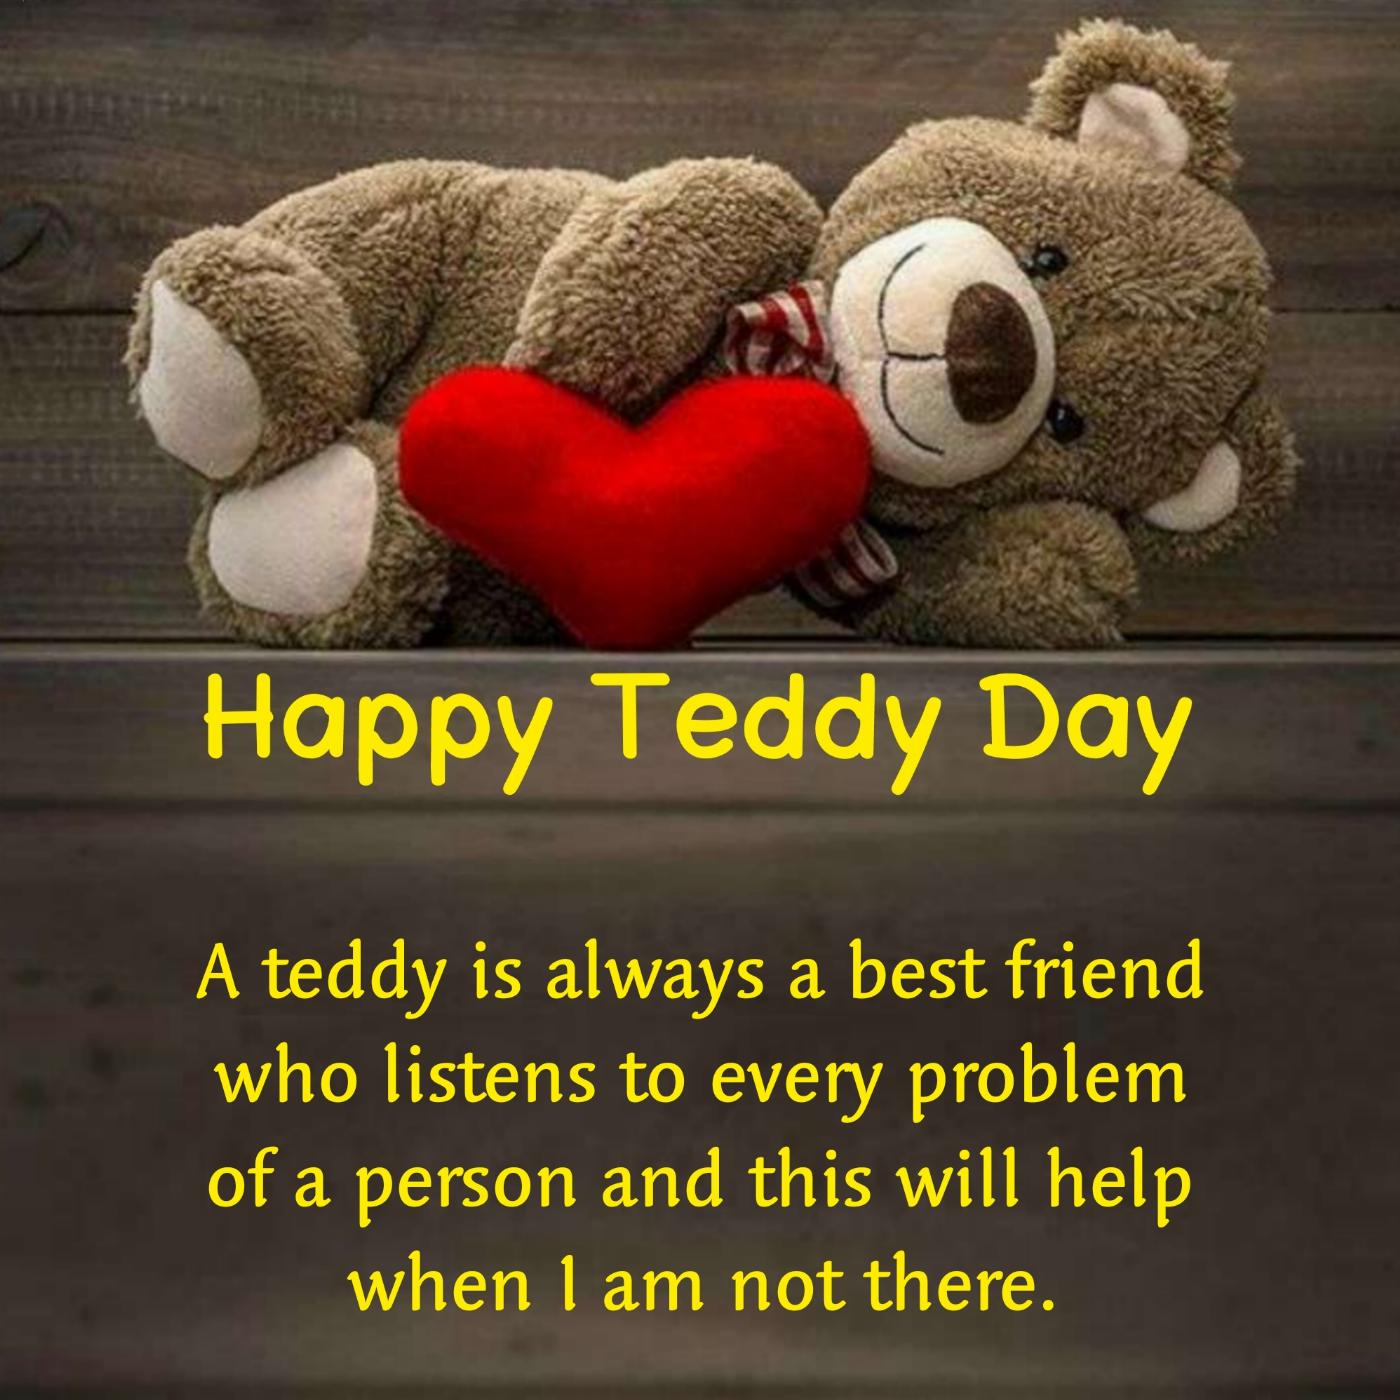 A teddy is always a best friend who listens to every problem